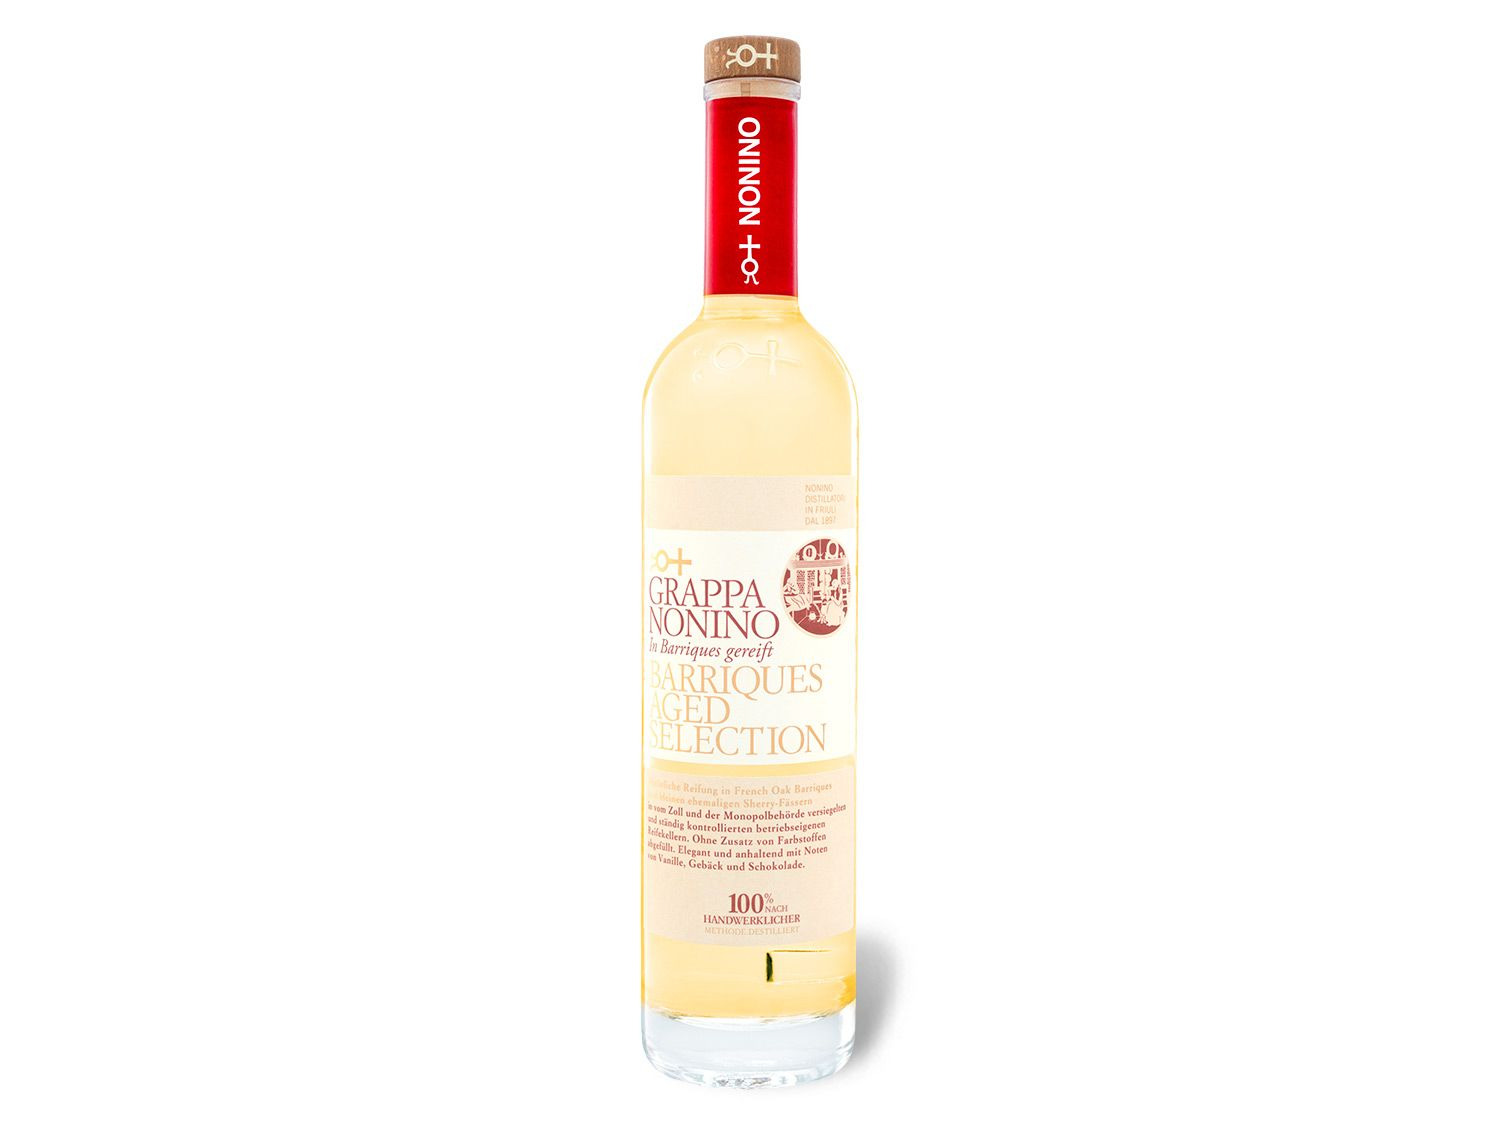 LIDL | Aged Selection Nonino Grappa Vol Barriques 41%